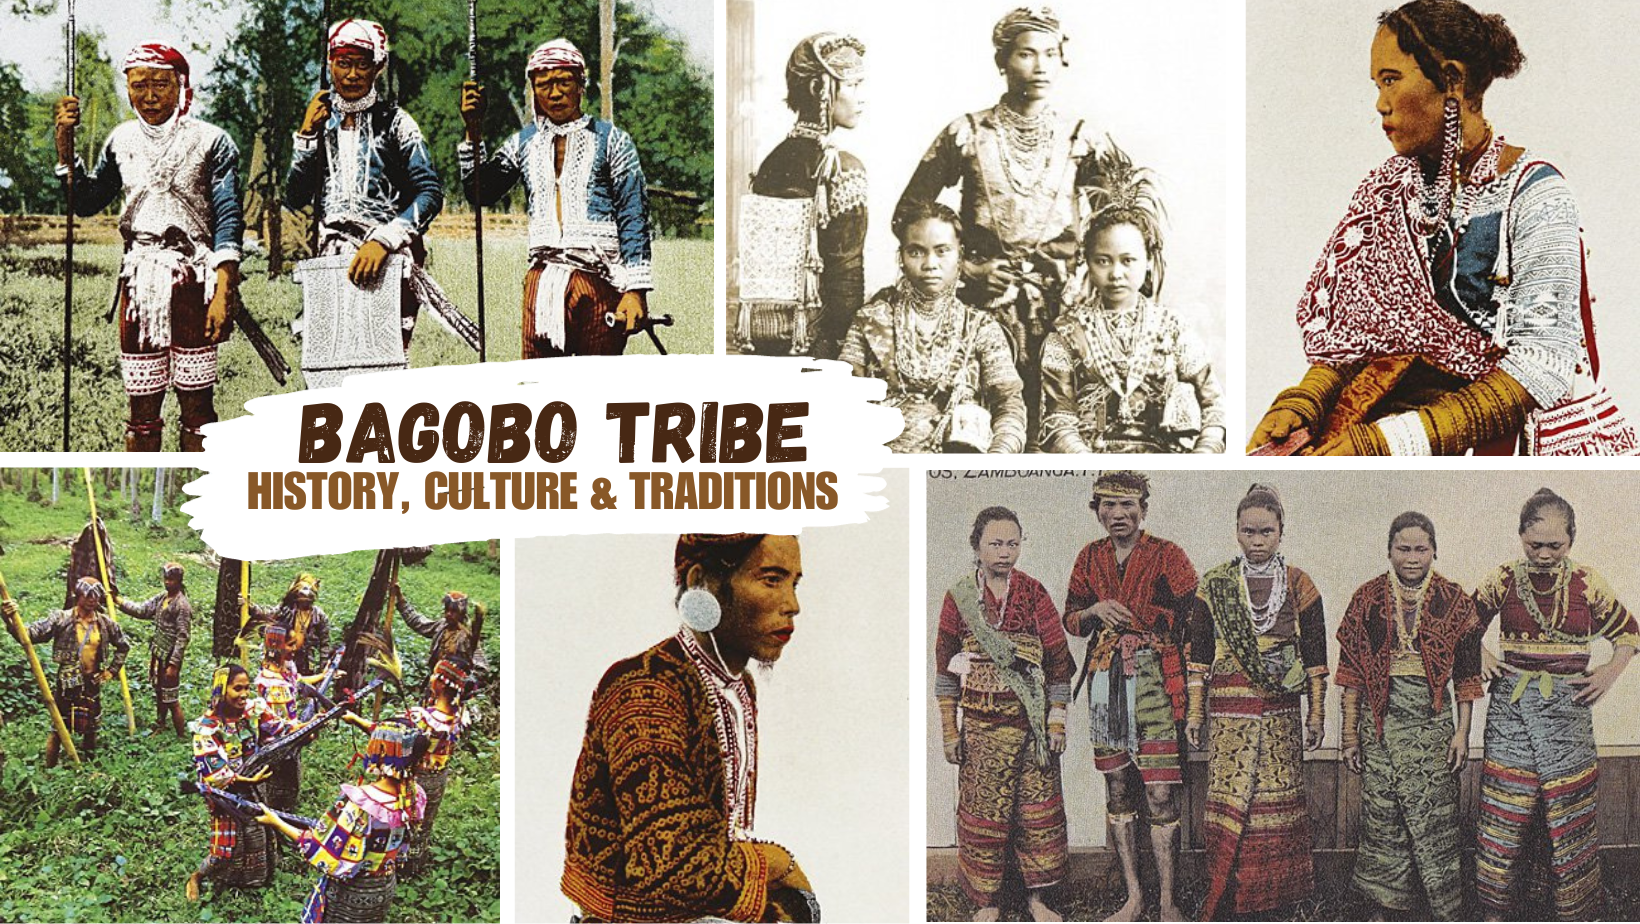 Bagobo Tribe History, Culture, Arts, Customs, Beliefs and Traditions [Mindanao Indigenous People | Philippines Ethnic Group]